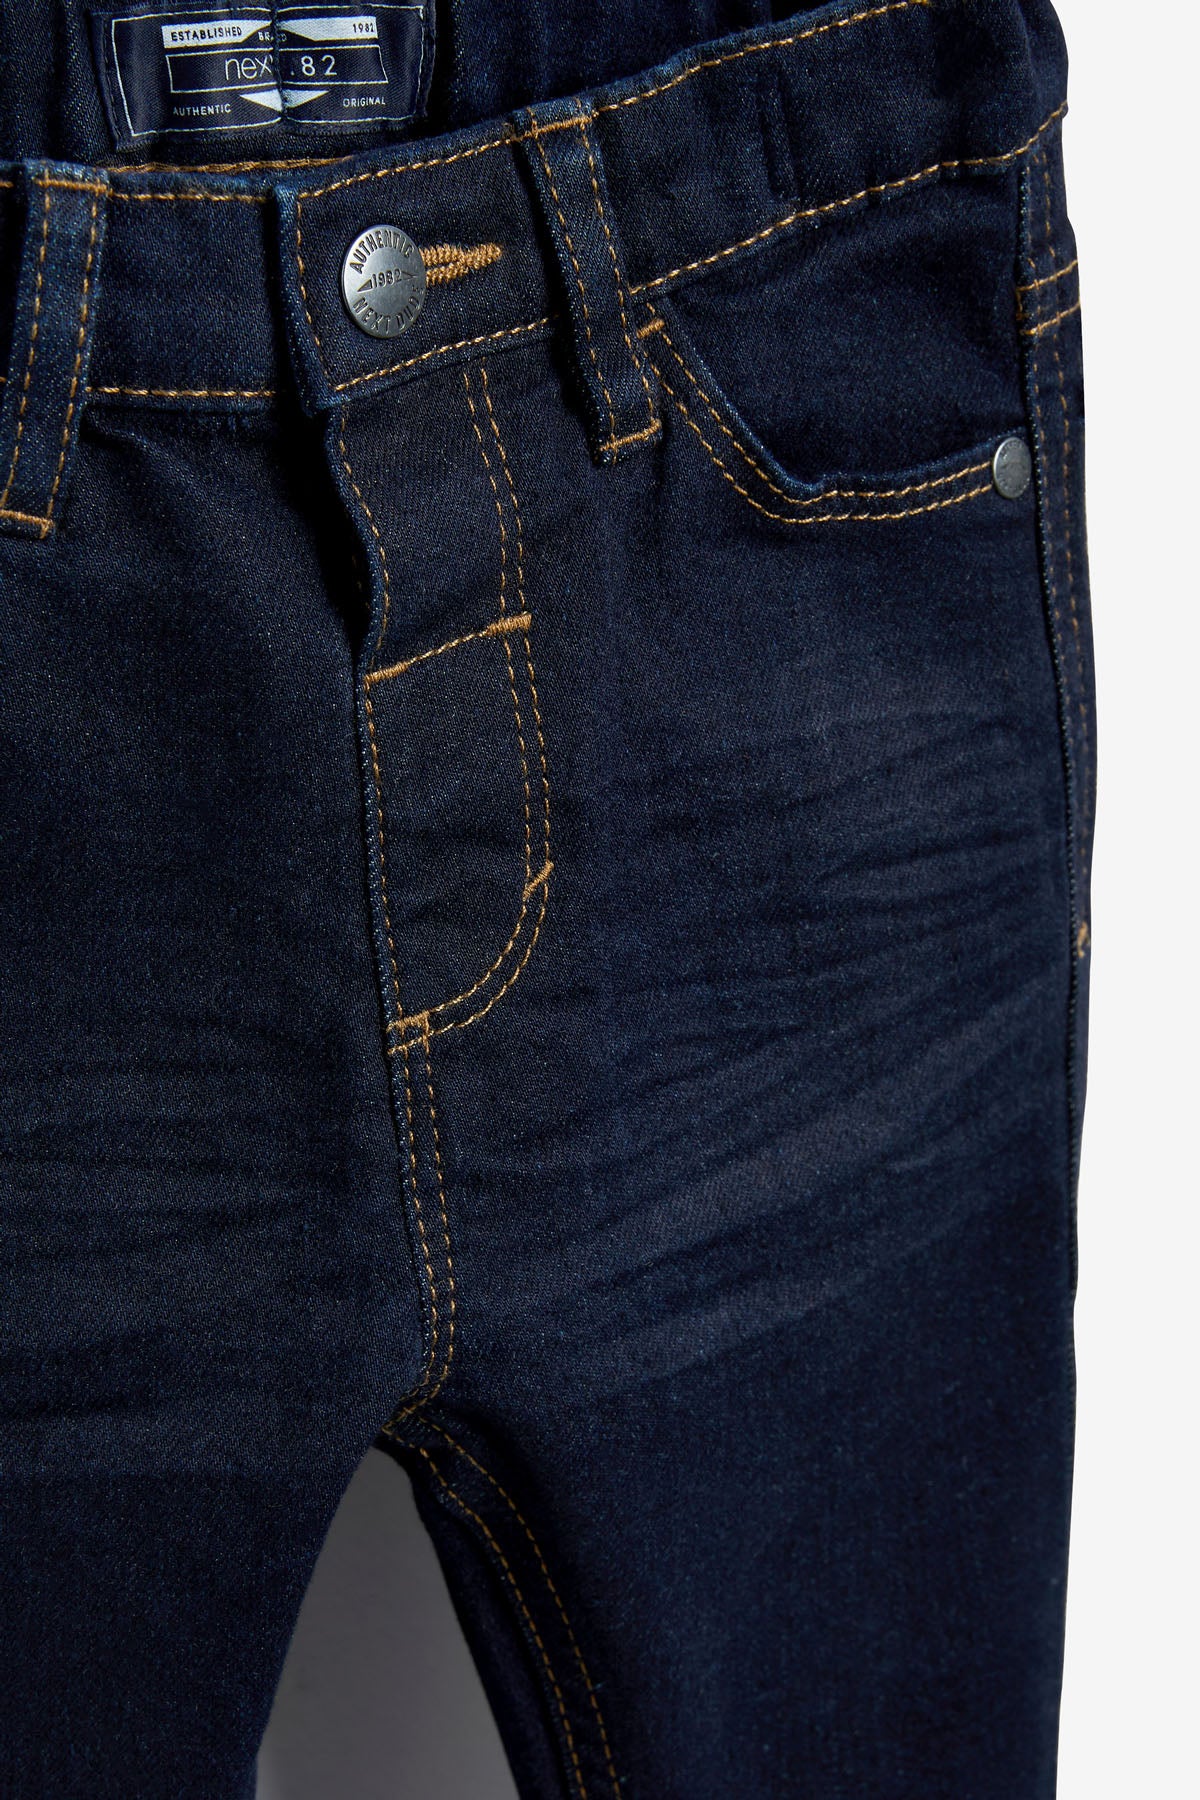 Slim Fit Jeans With Stretch